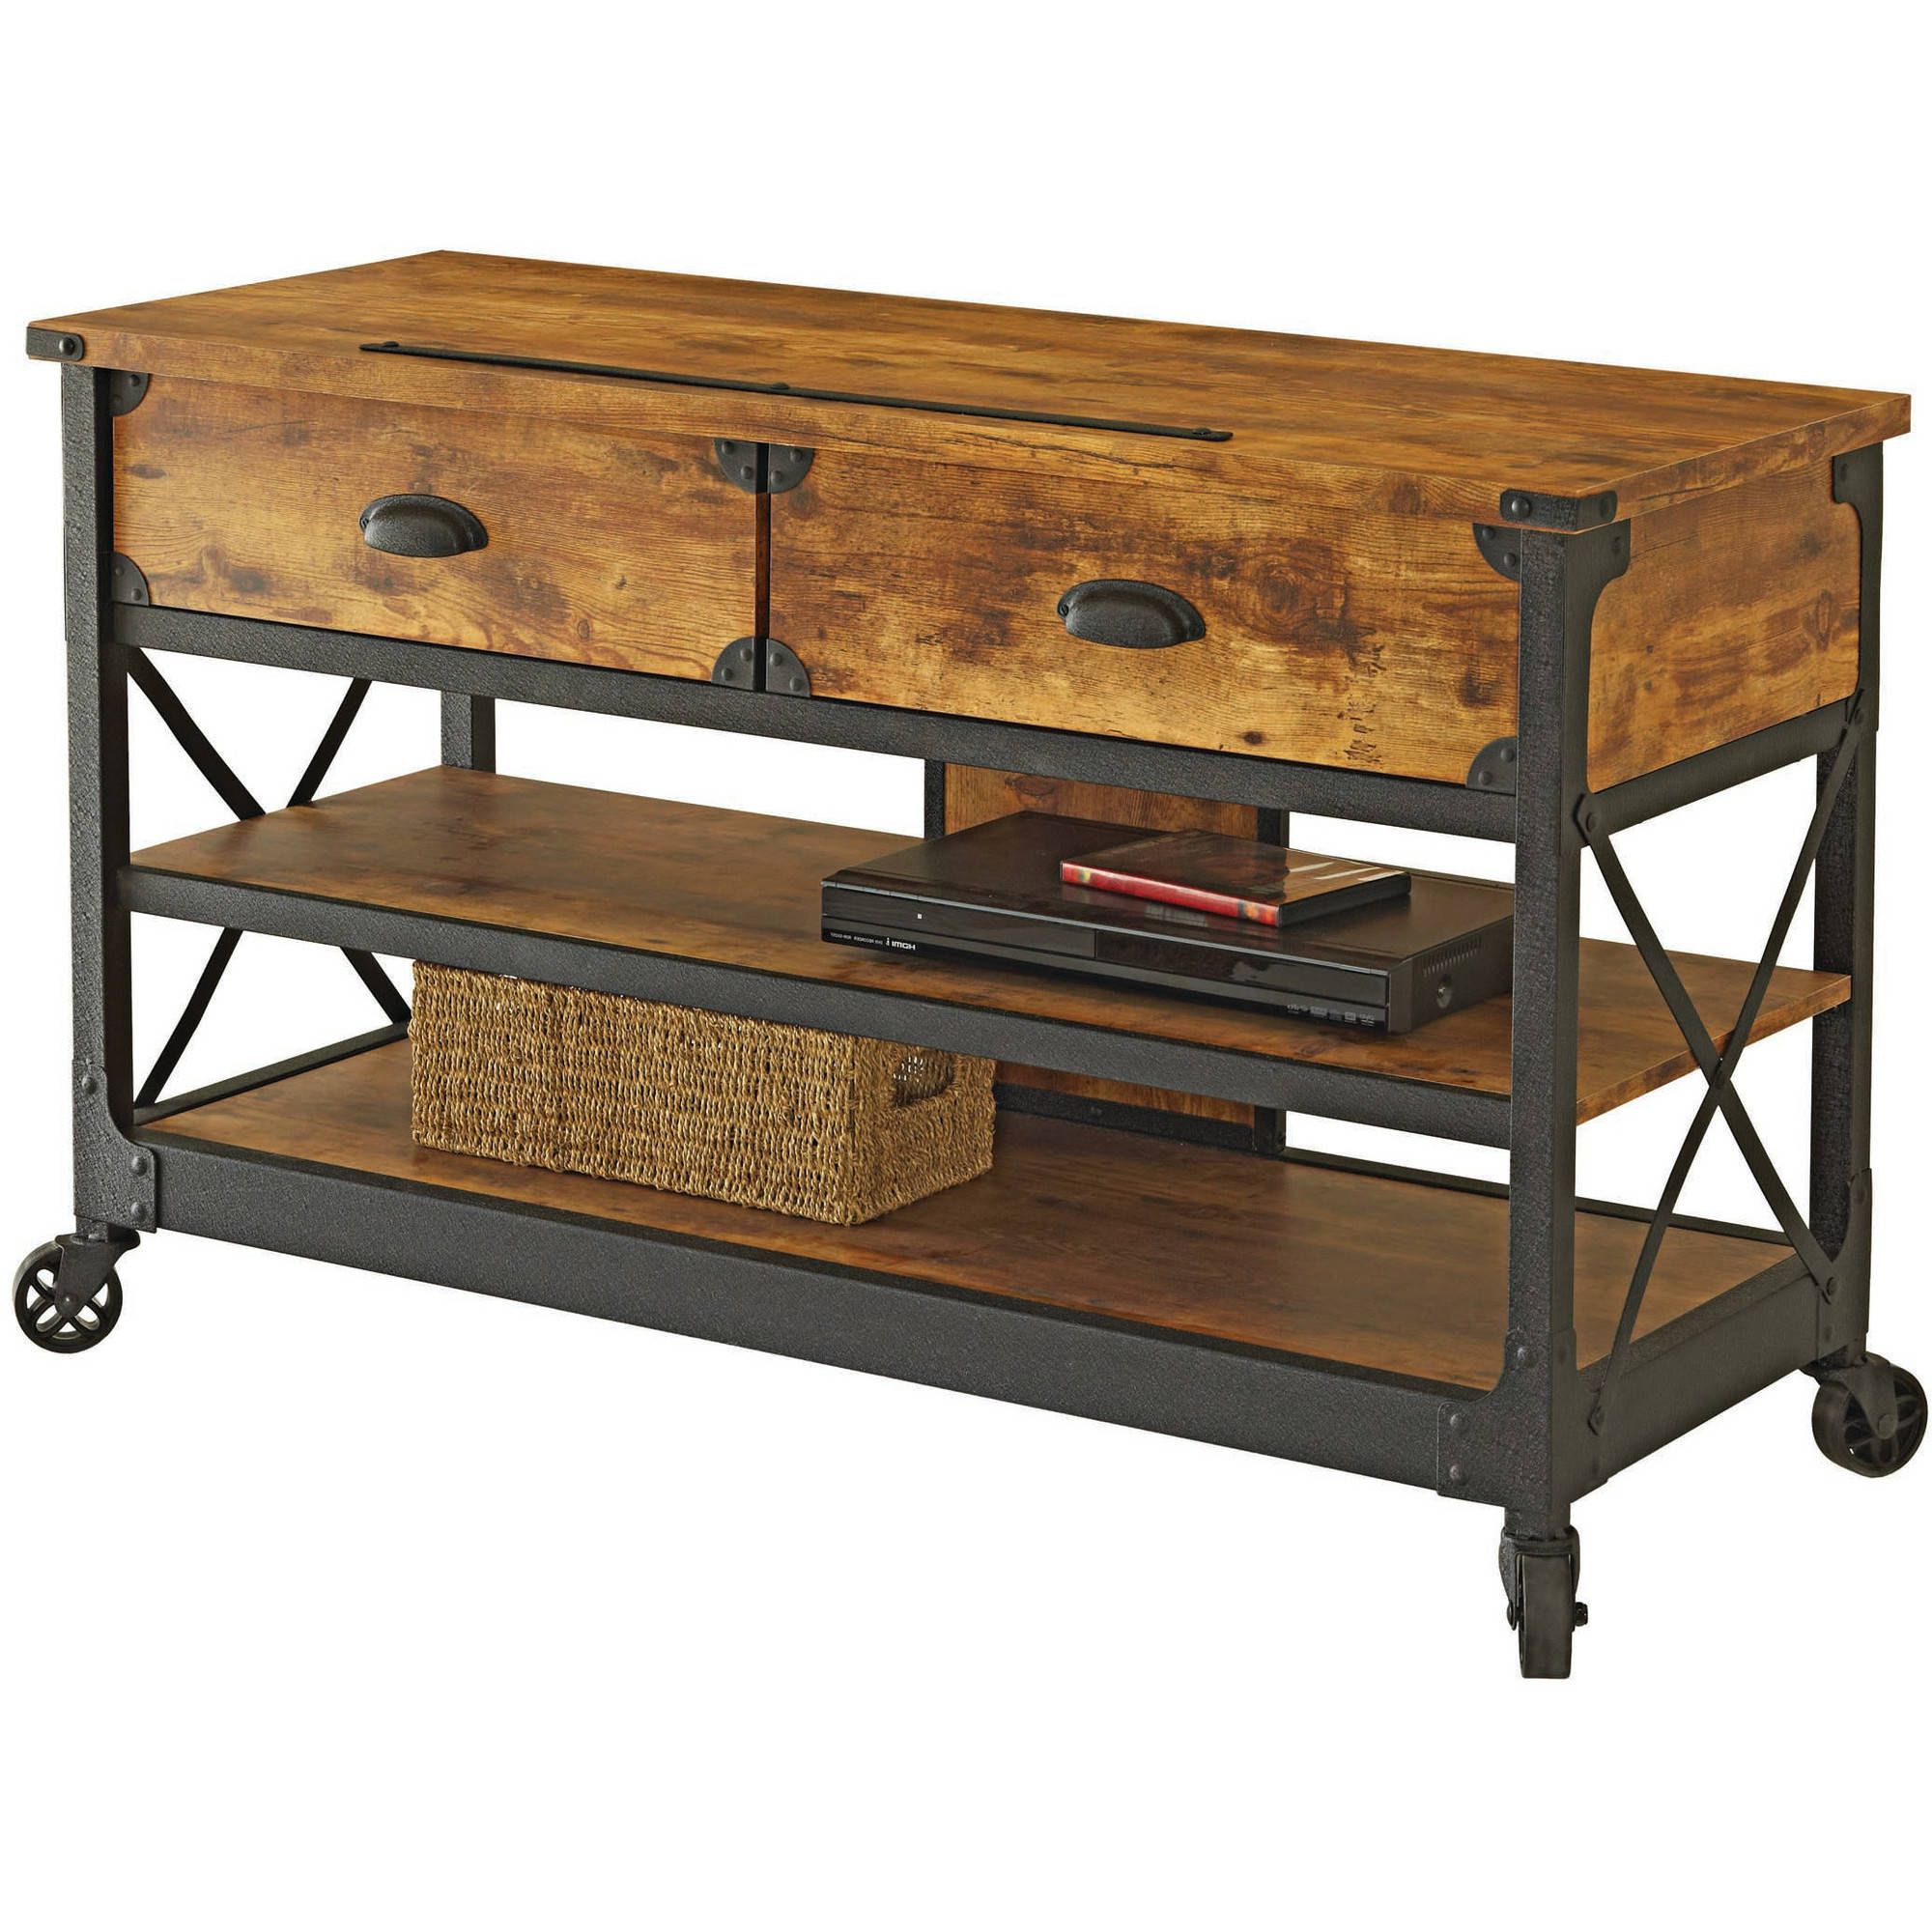 Better Homes & Gardens Rustic Country Tv Stand For Tvs Up To 52 With Regard To Most Current Pine Tv Stands (View 6 of 20)